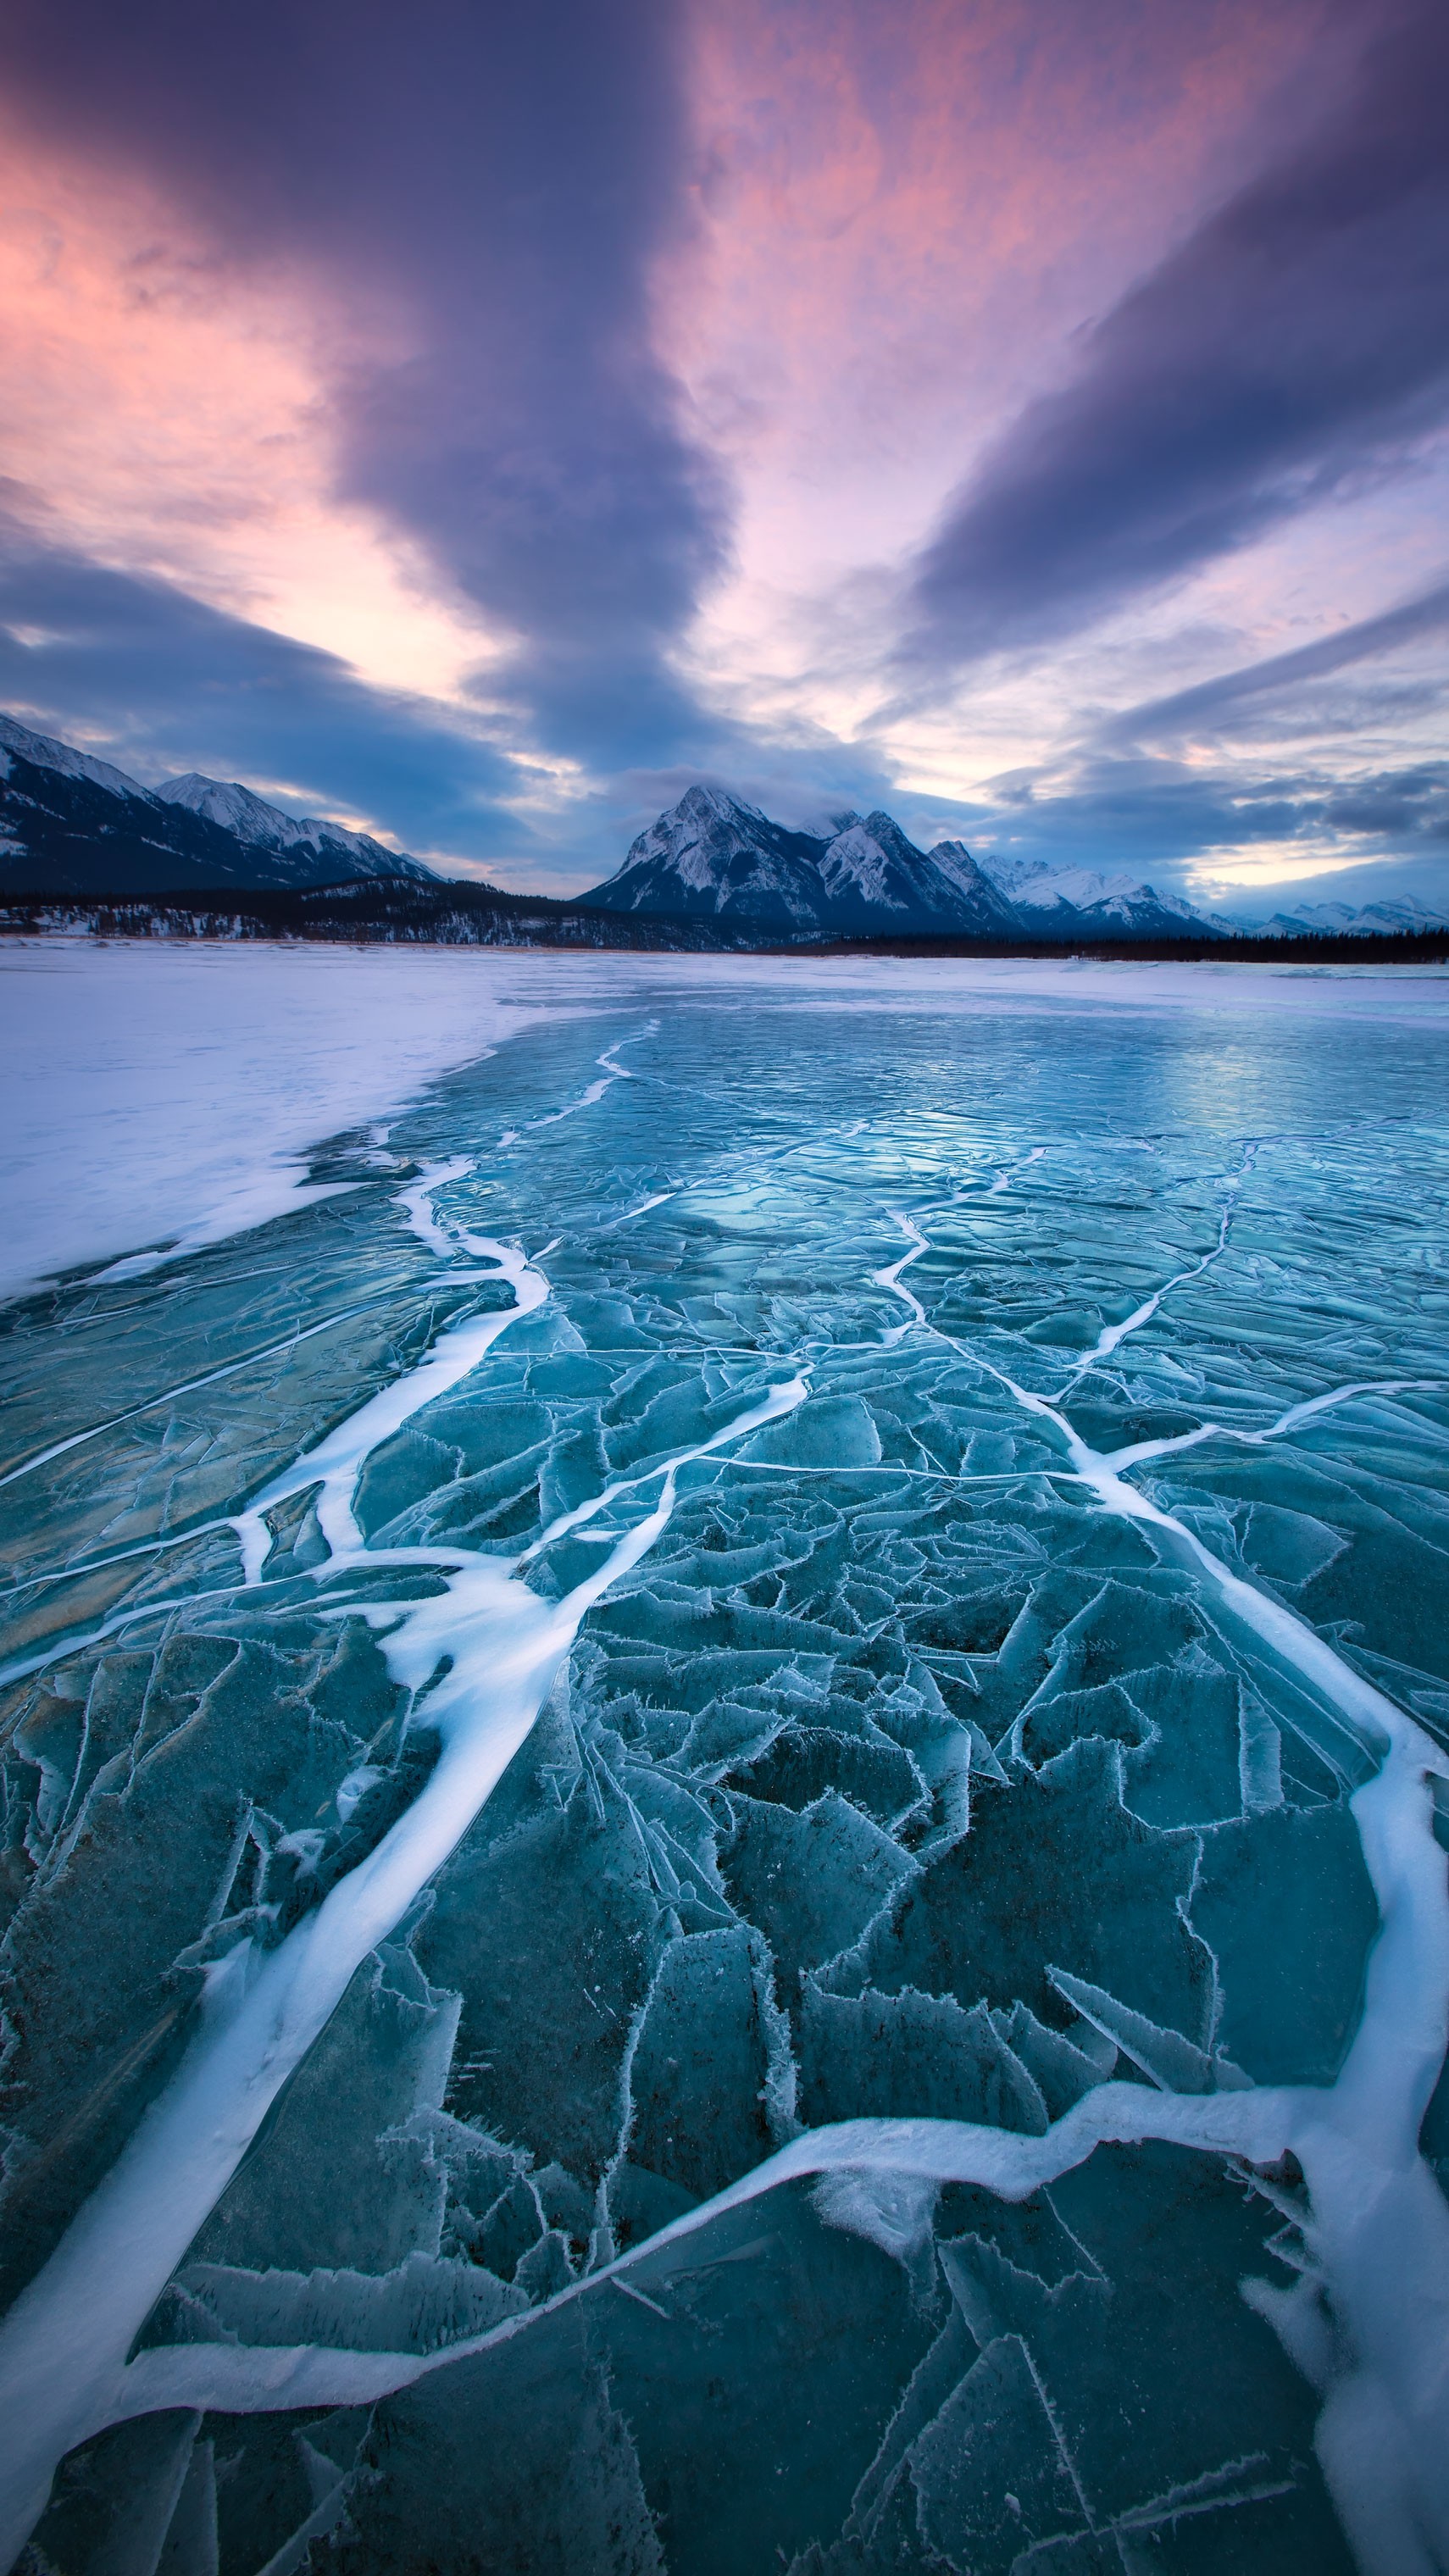 General 1710x3040 landscape lake ice mountains winter cold frost sky nature outdoors